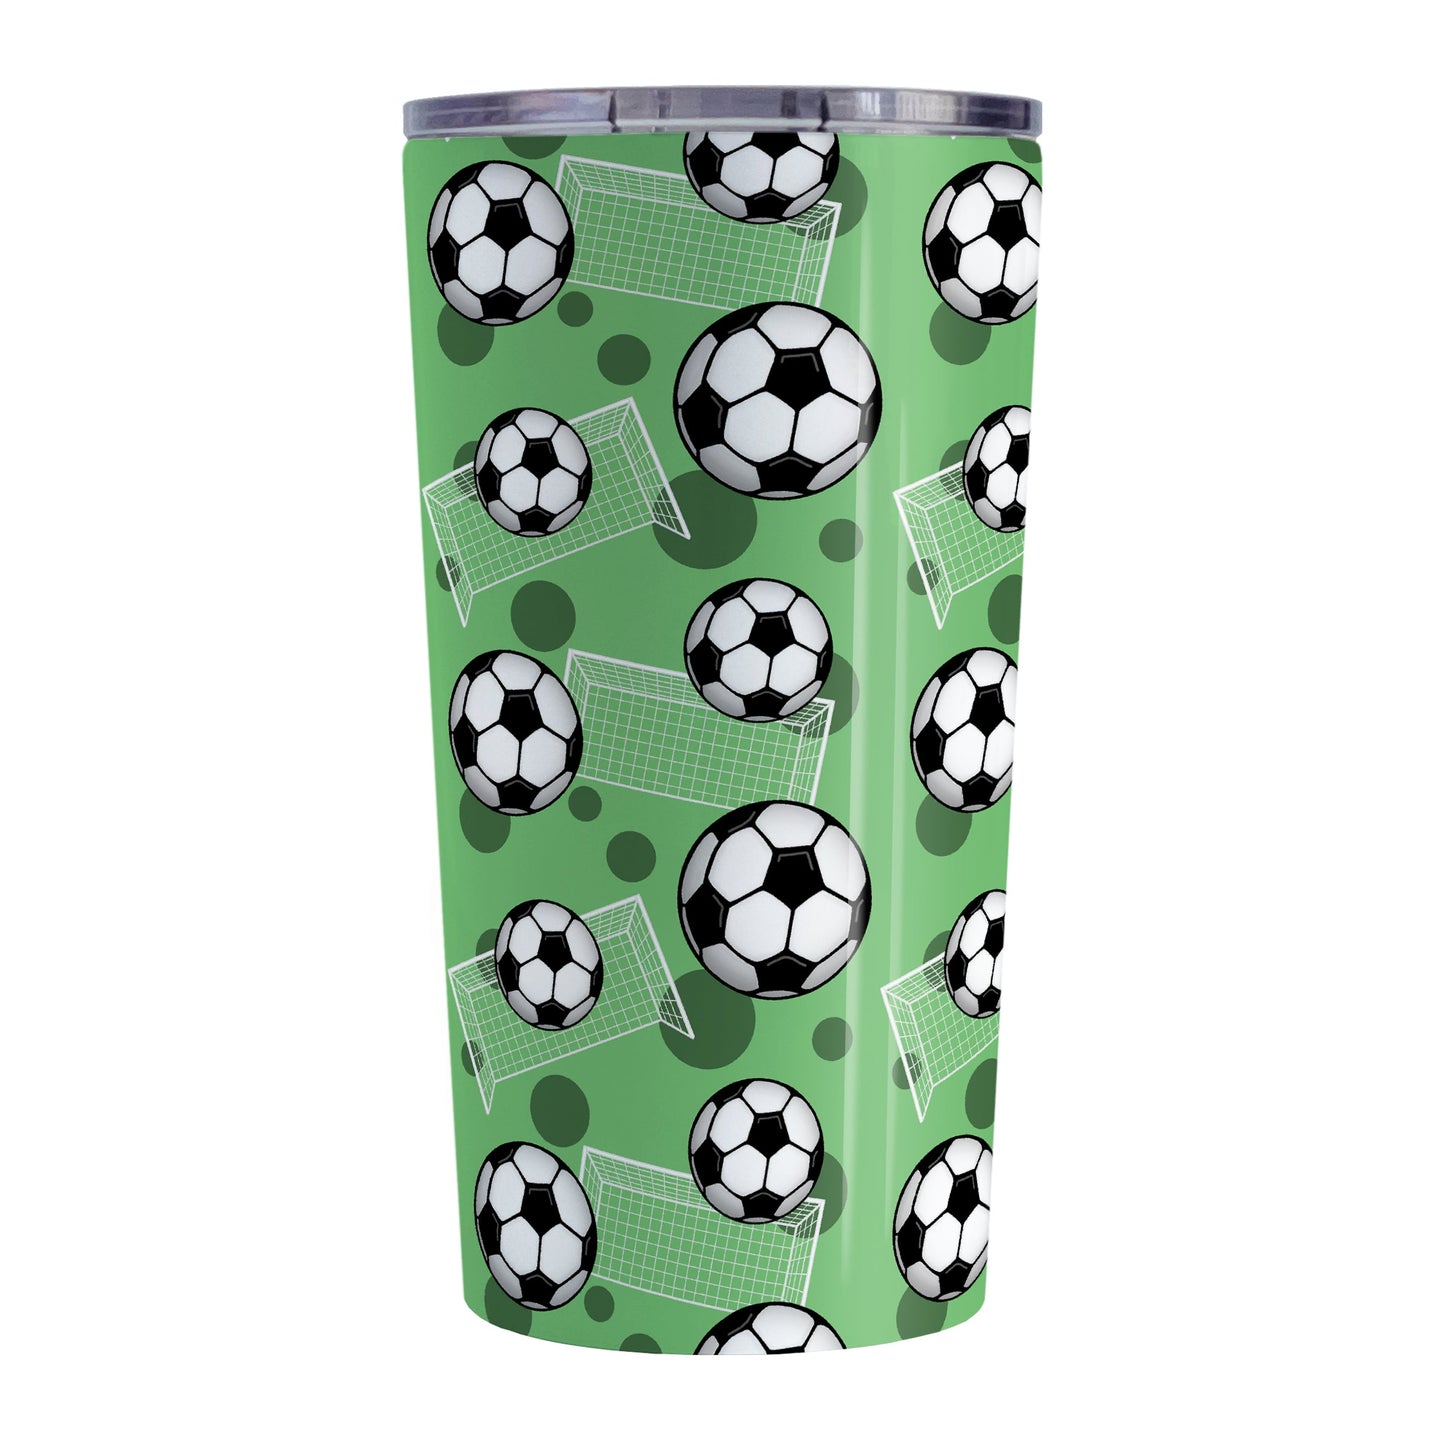 Soccer Ball and Goal Pattern Green Tumbler Cup (20oz) at Amy's Coffee Mugs. A stainless steel insulated tumbler cup designed with a pattern of soccer balls and goals over a green background that wraps around the cup. This green soccer tumbler cup is perfect for people who love or play soccer.